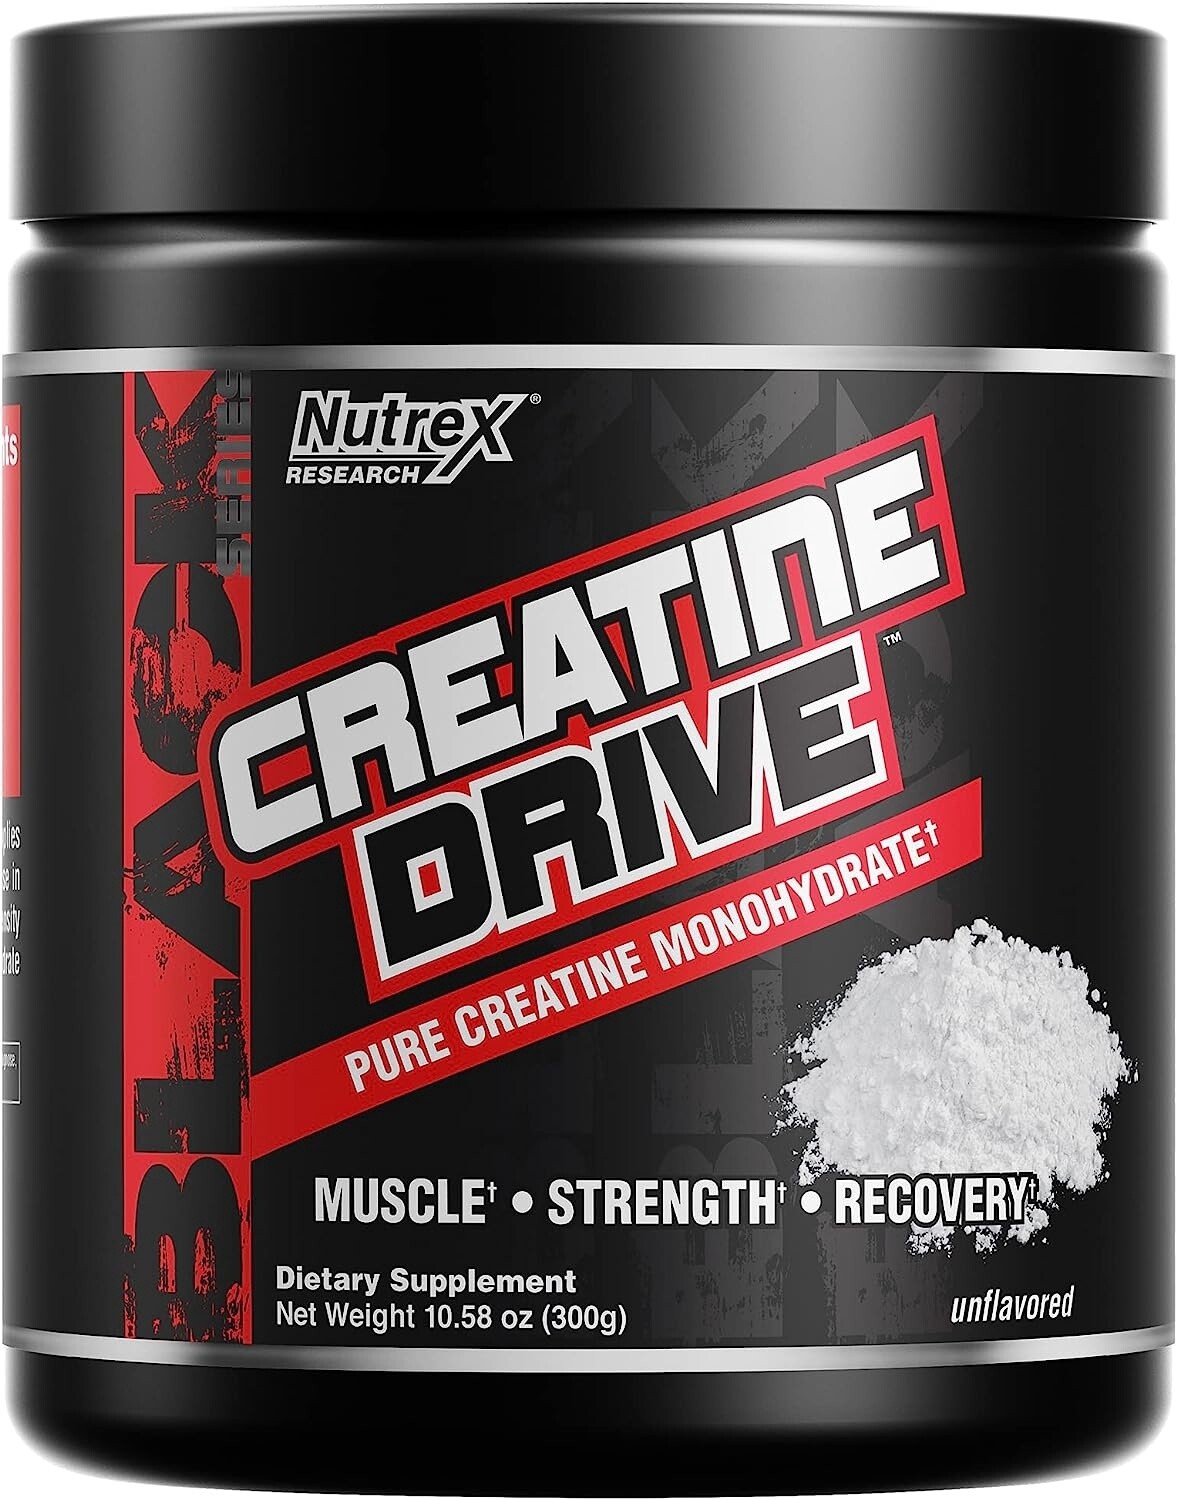 Nutrex Research Ultra Pure Creatine Monohydrate Powder Unflavored 300g.